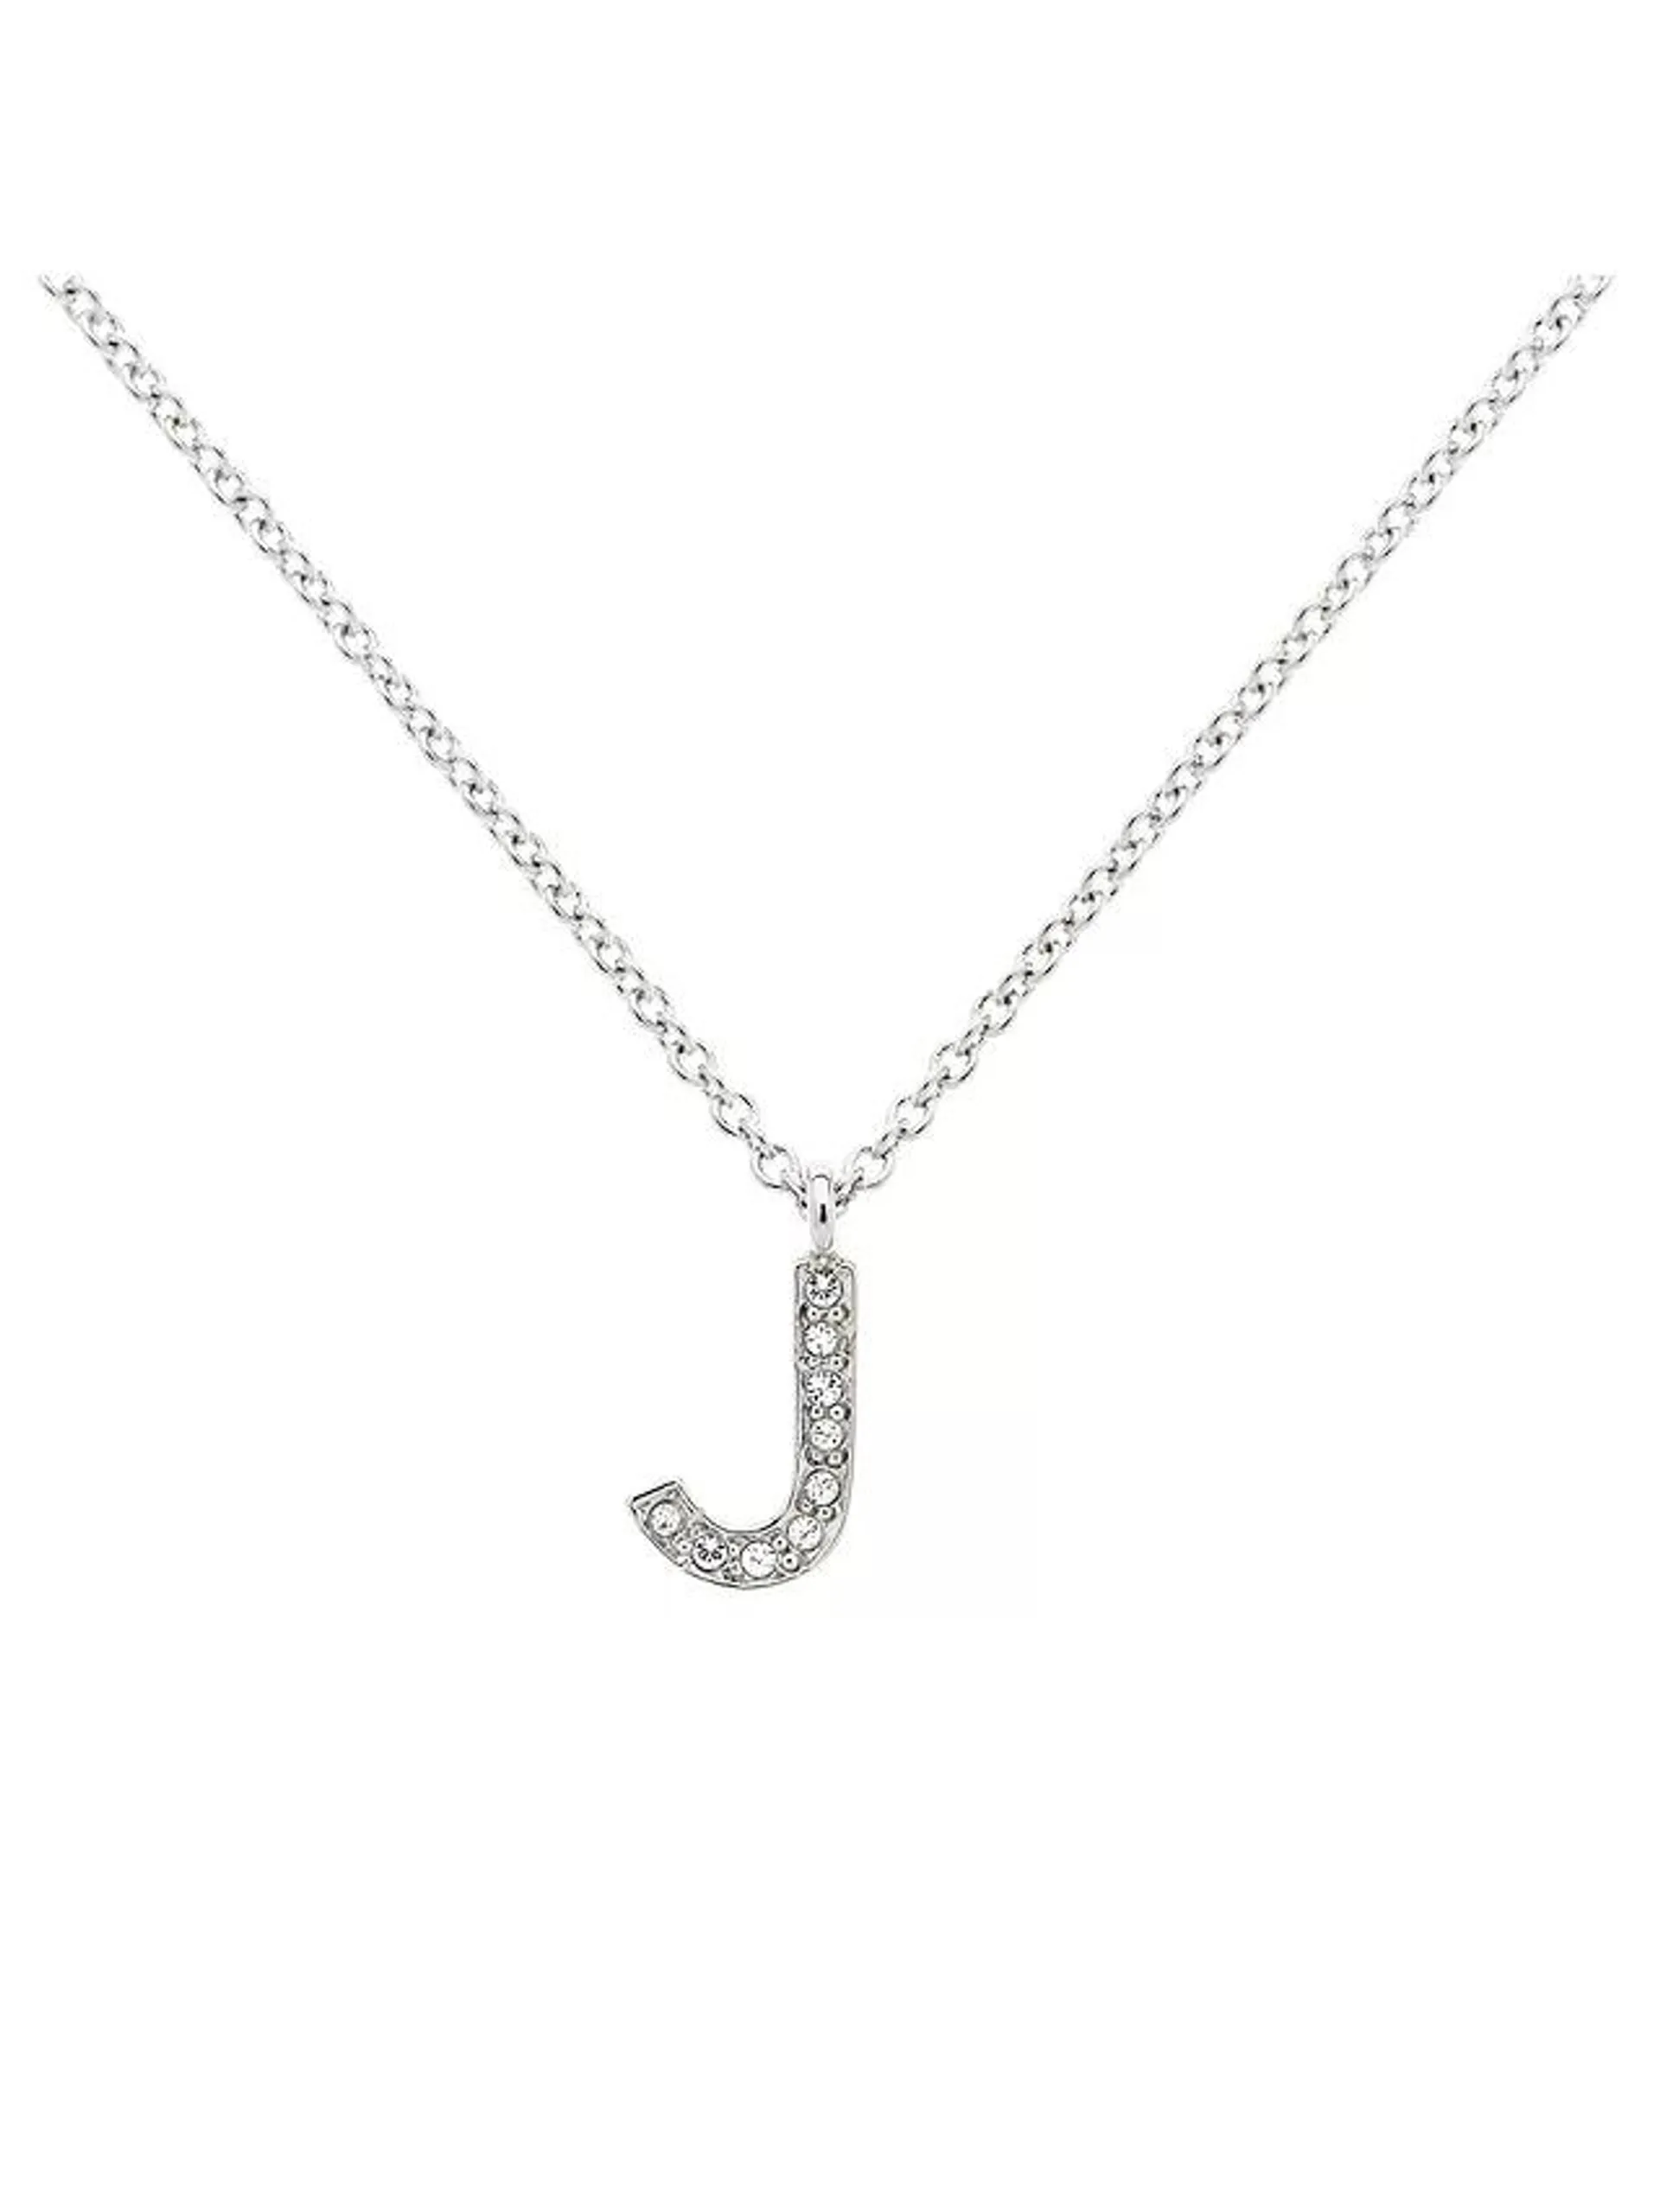 Melissa Odabash Glass Crystal Initial Pendant Necklace, Silver